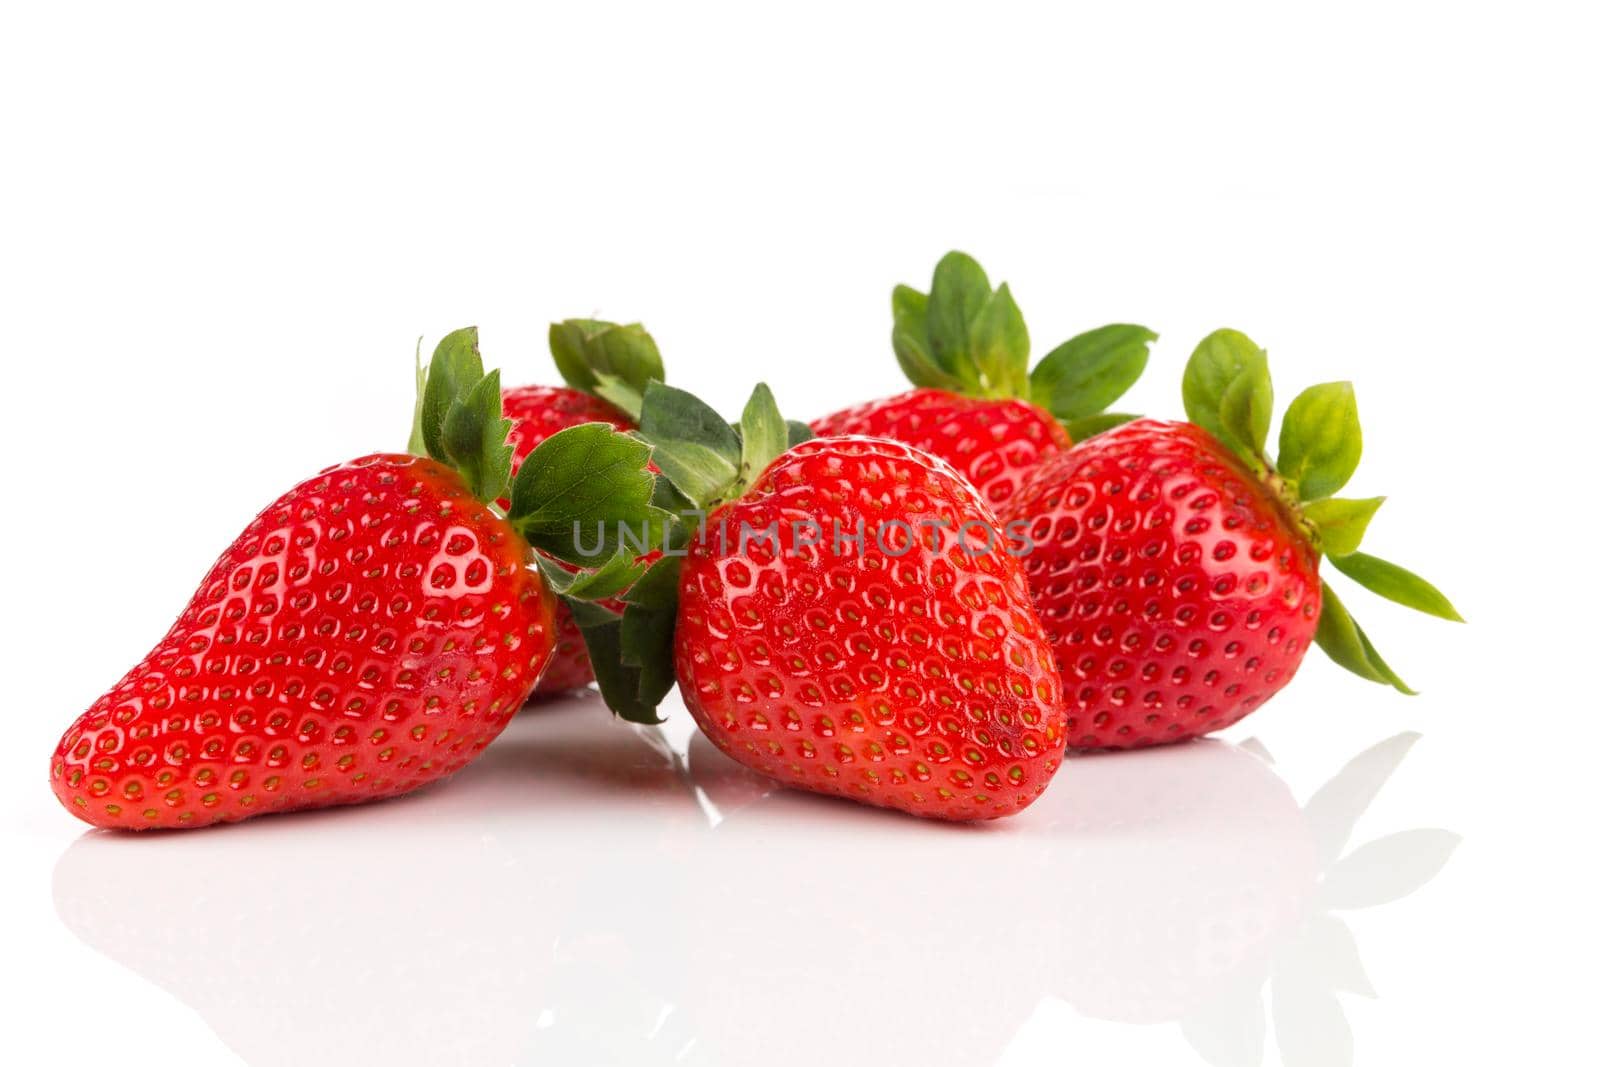 Red ripe strawberry fruits on a dark background